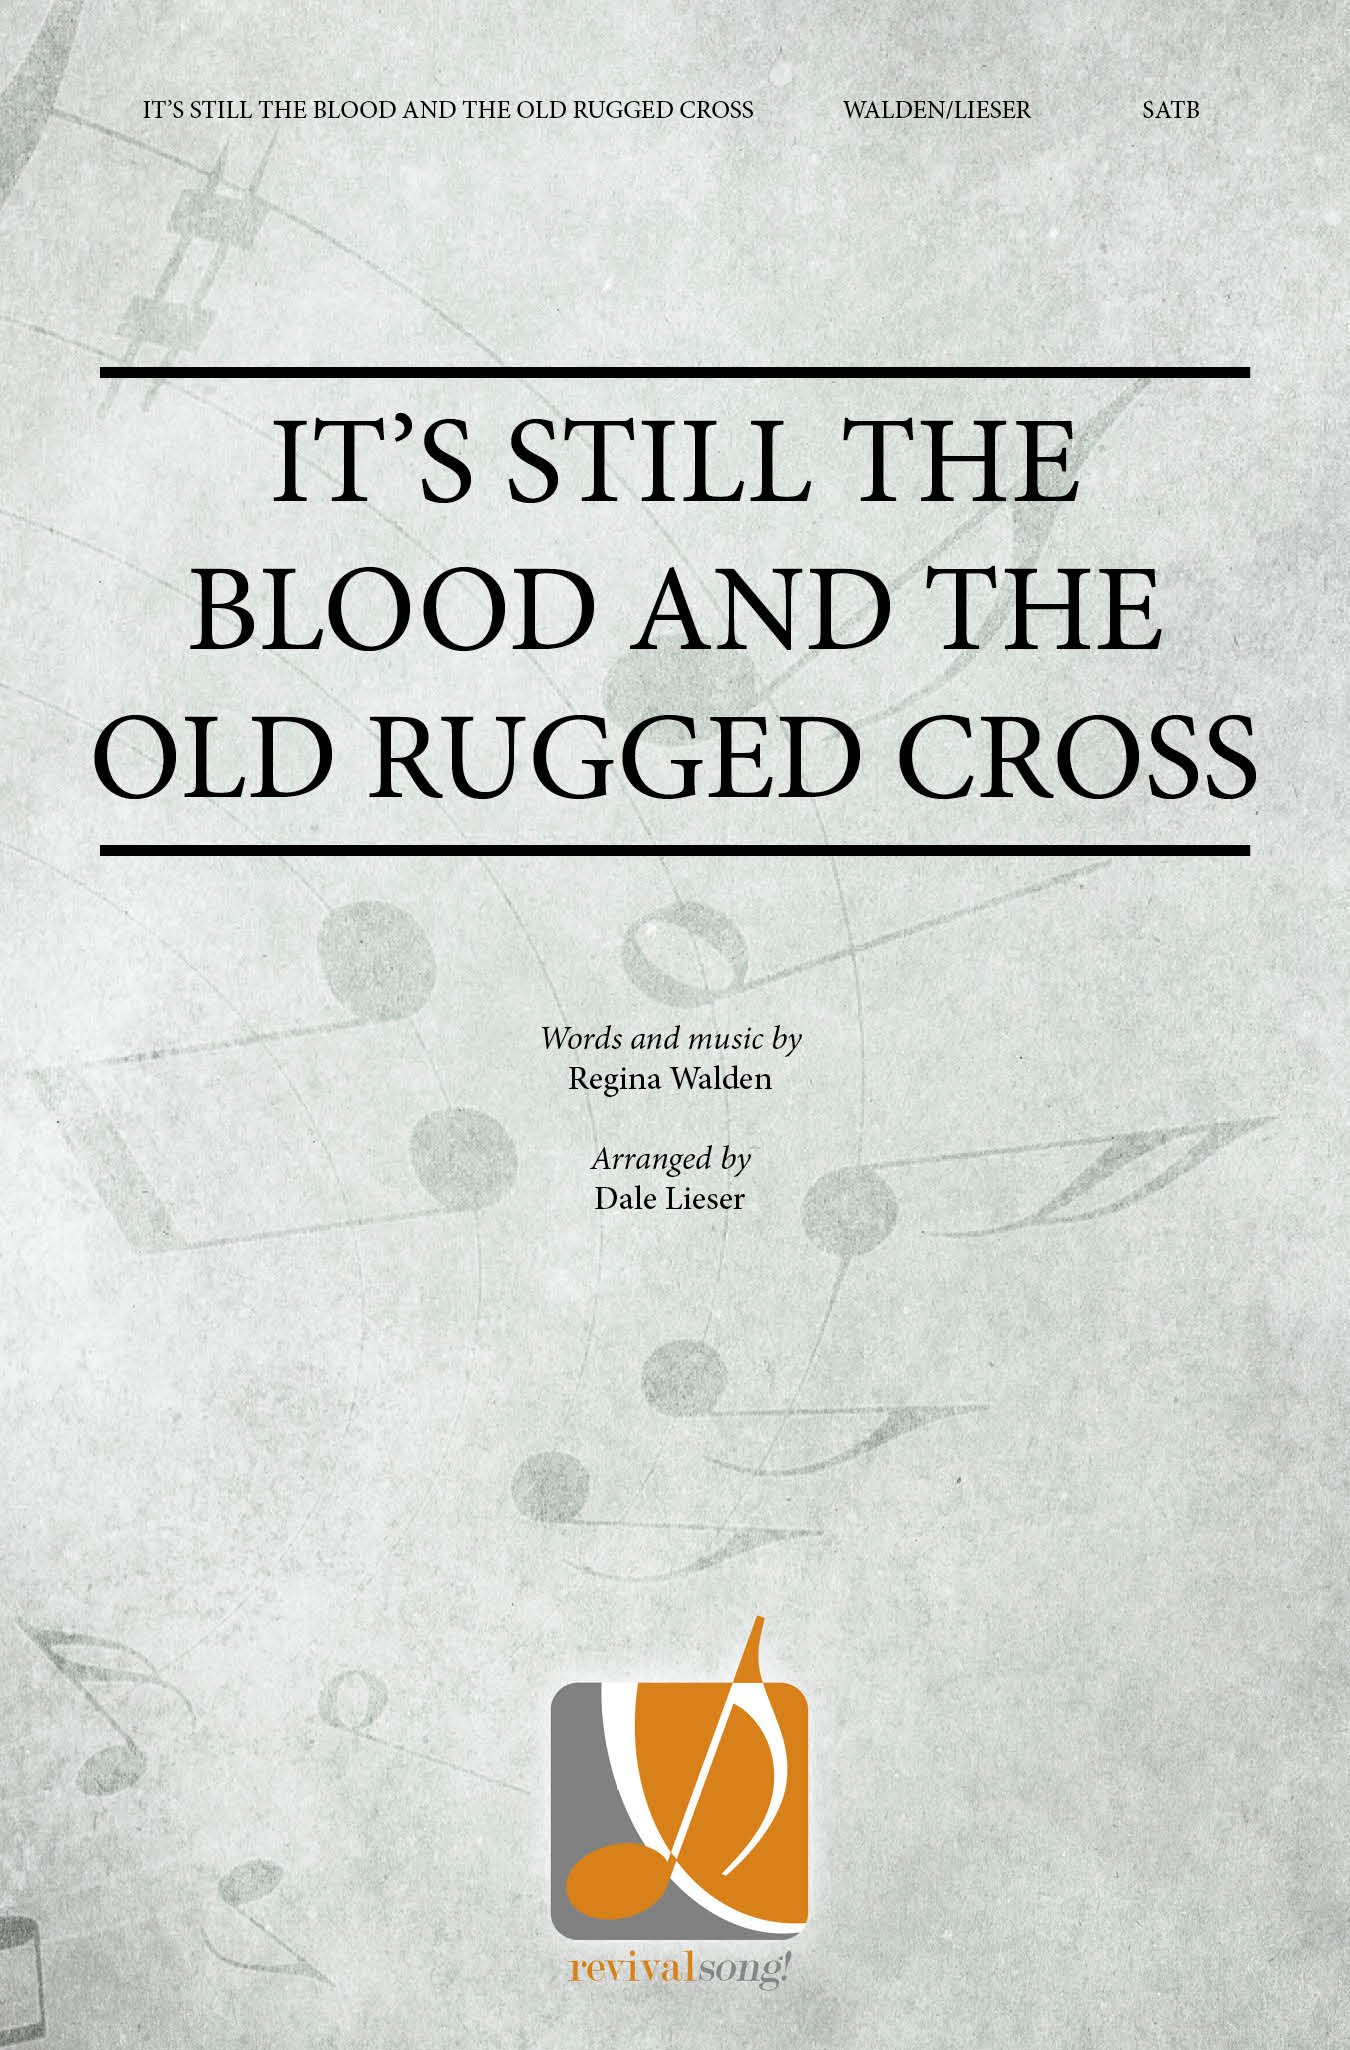 Rugged Cross Logo - It's Still the Blood and the Old Rugged Cross #SATB034